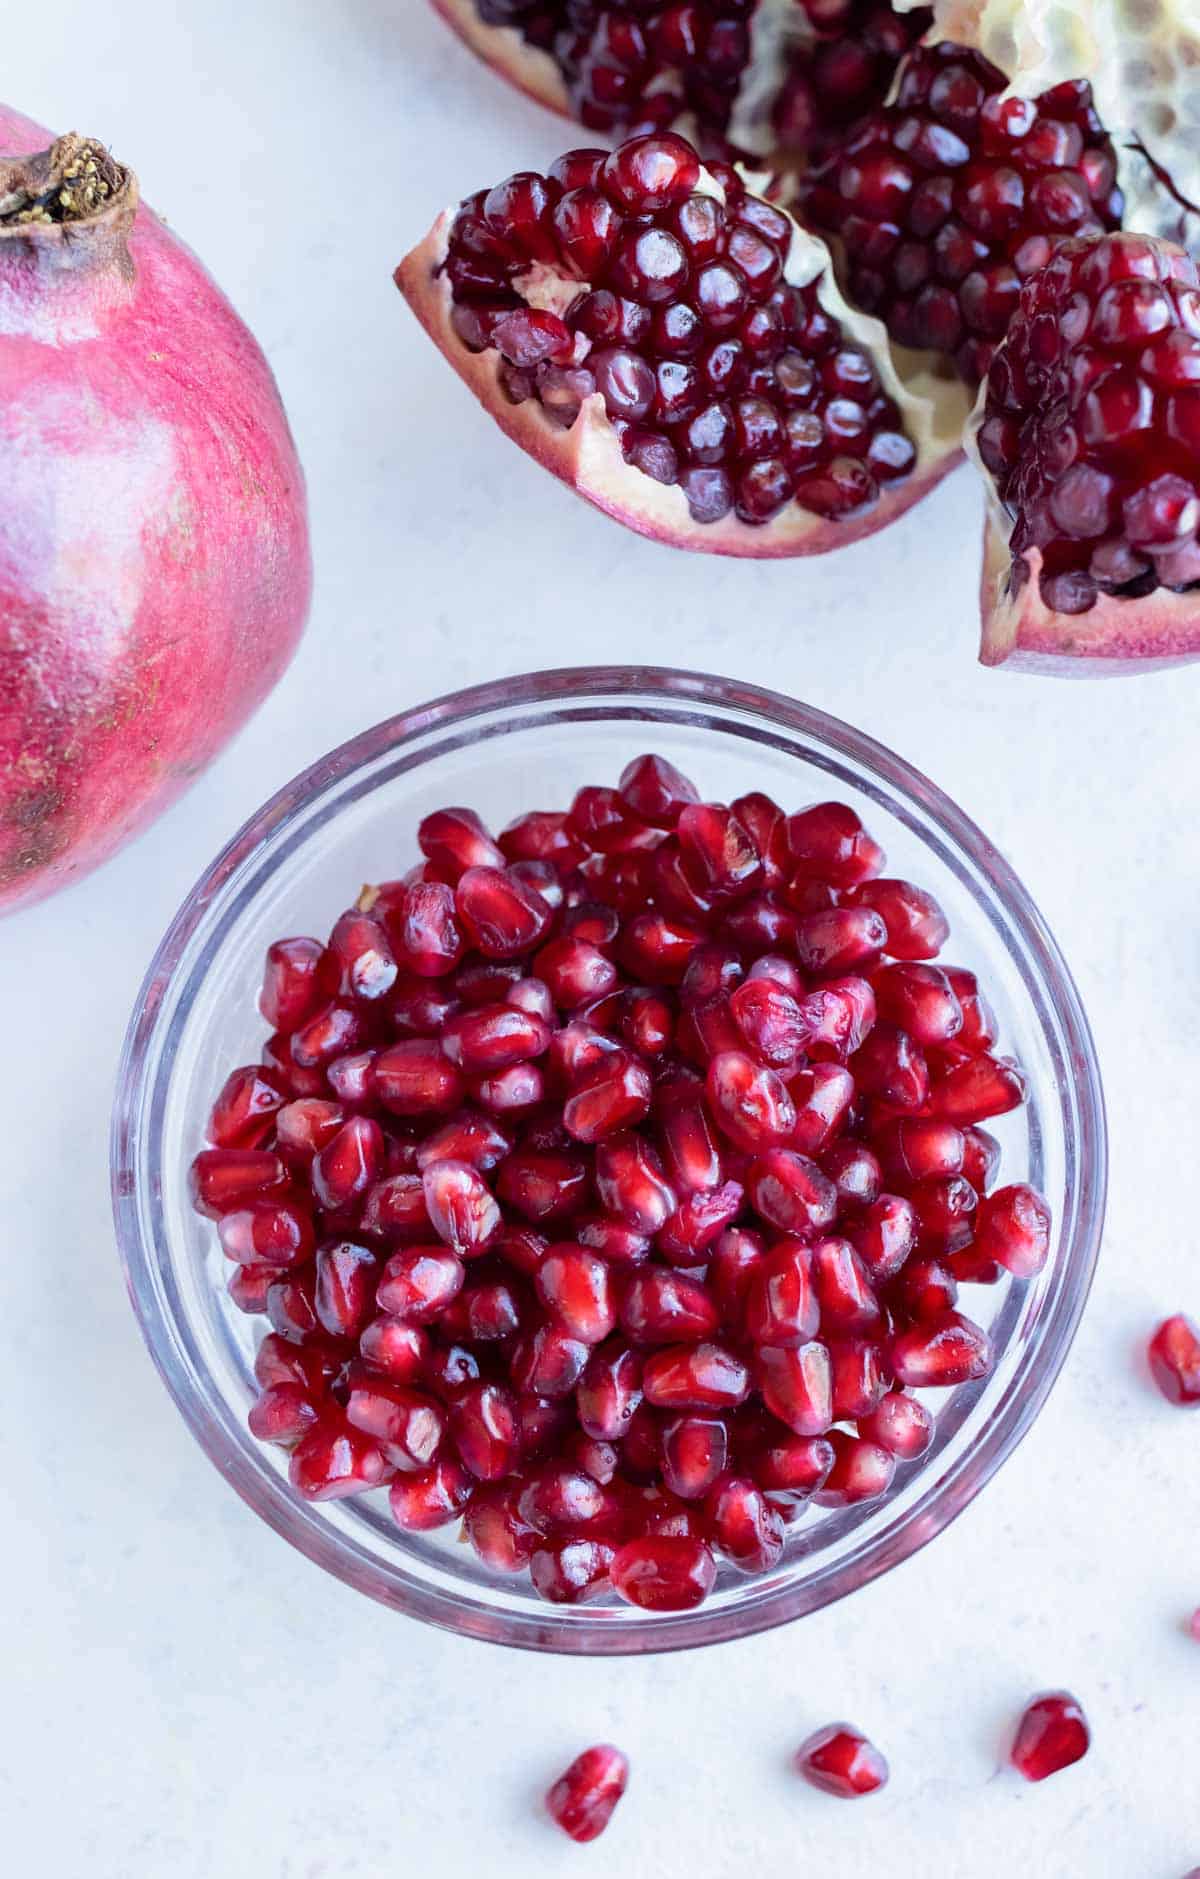 Pomegranate seeds are placed in a bowl near a cut open pomegranate.